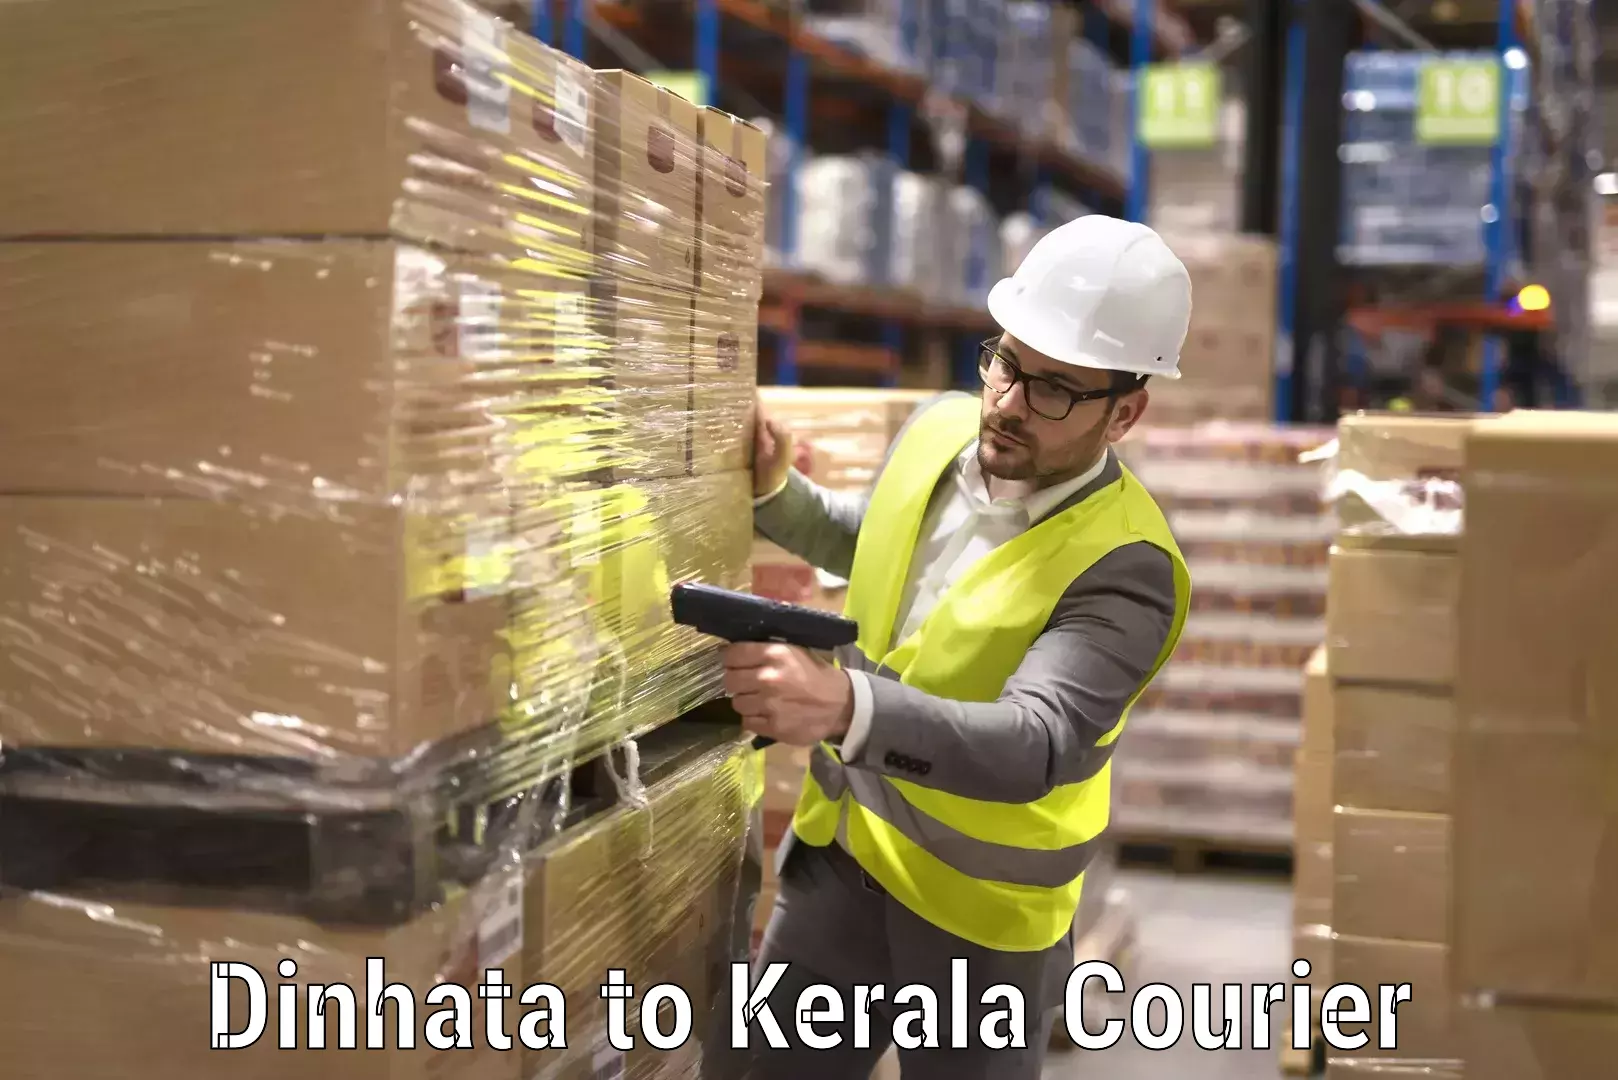 Expert moving and storage Dinhata to Kerala